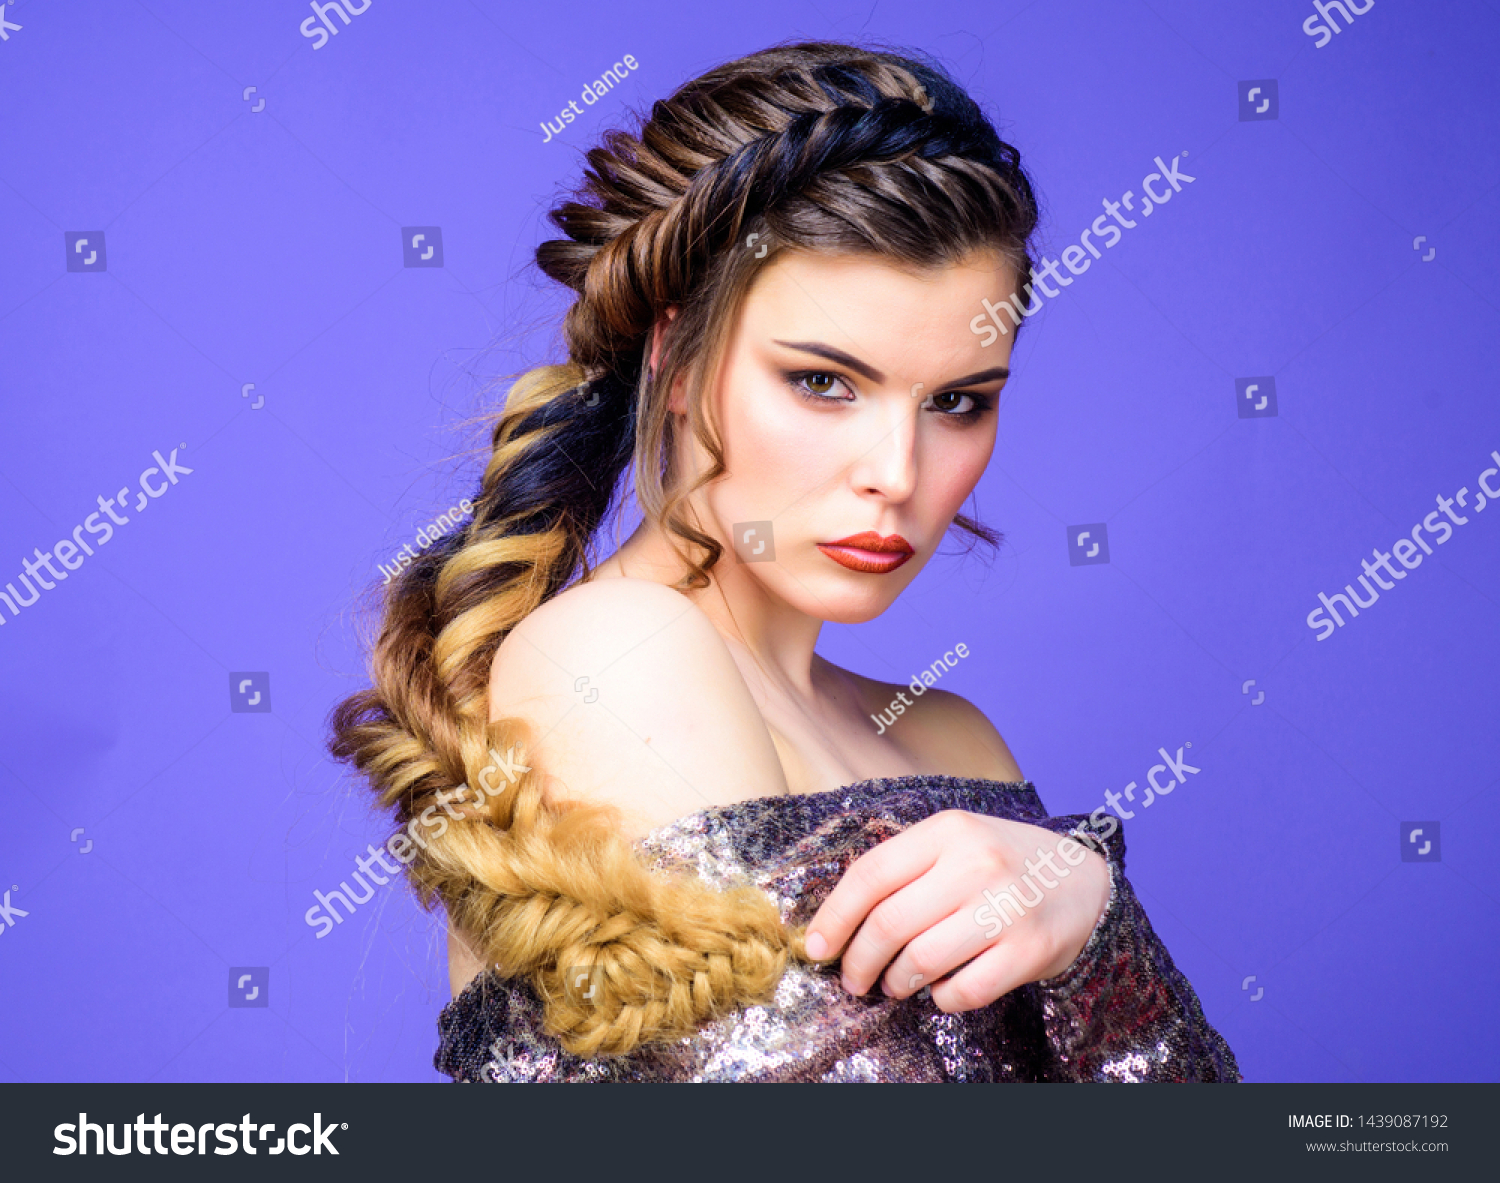 Beauty salon hairdresser art. Girl makeup face braided long hair. French braid. Professional hair care and creating hairstyle. Braided hairstyle. Beautiful young woman with modern hairstyle. #1439087192